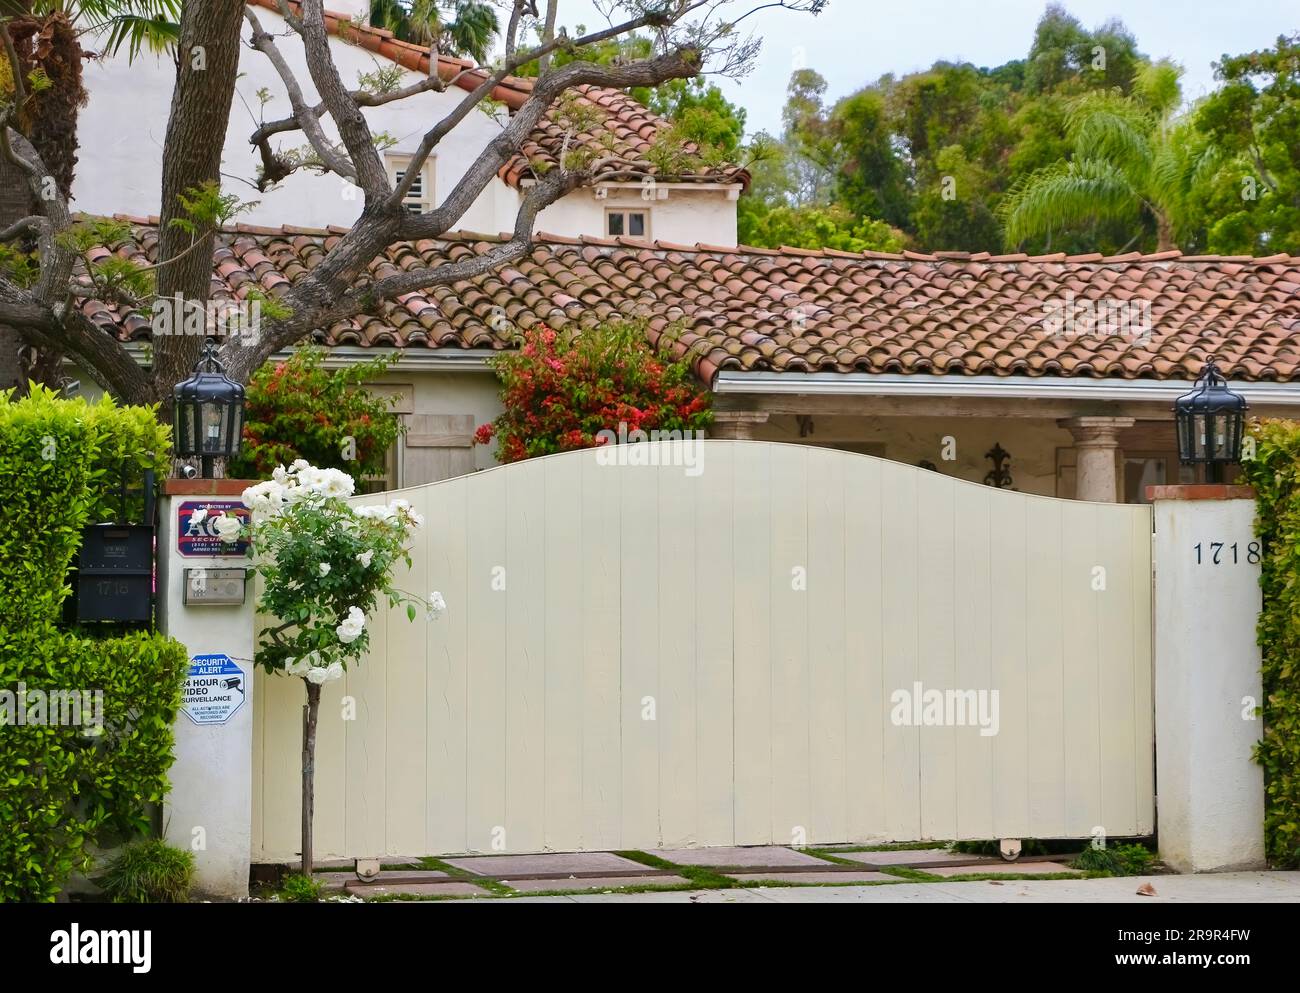 Home of famous American film star Sir Sidney Poitier 1718 Angelo Drive Beverly Hills California 90210 USA Stock Photo